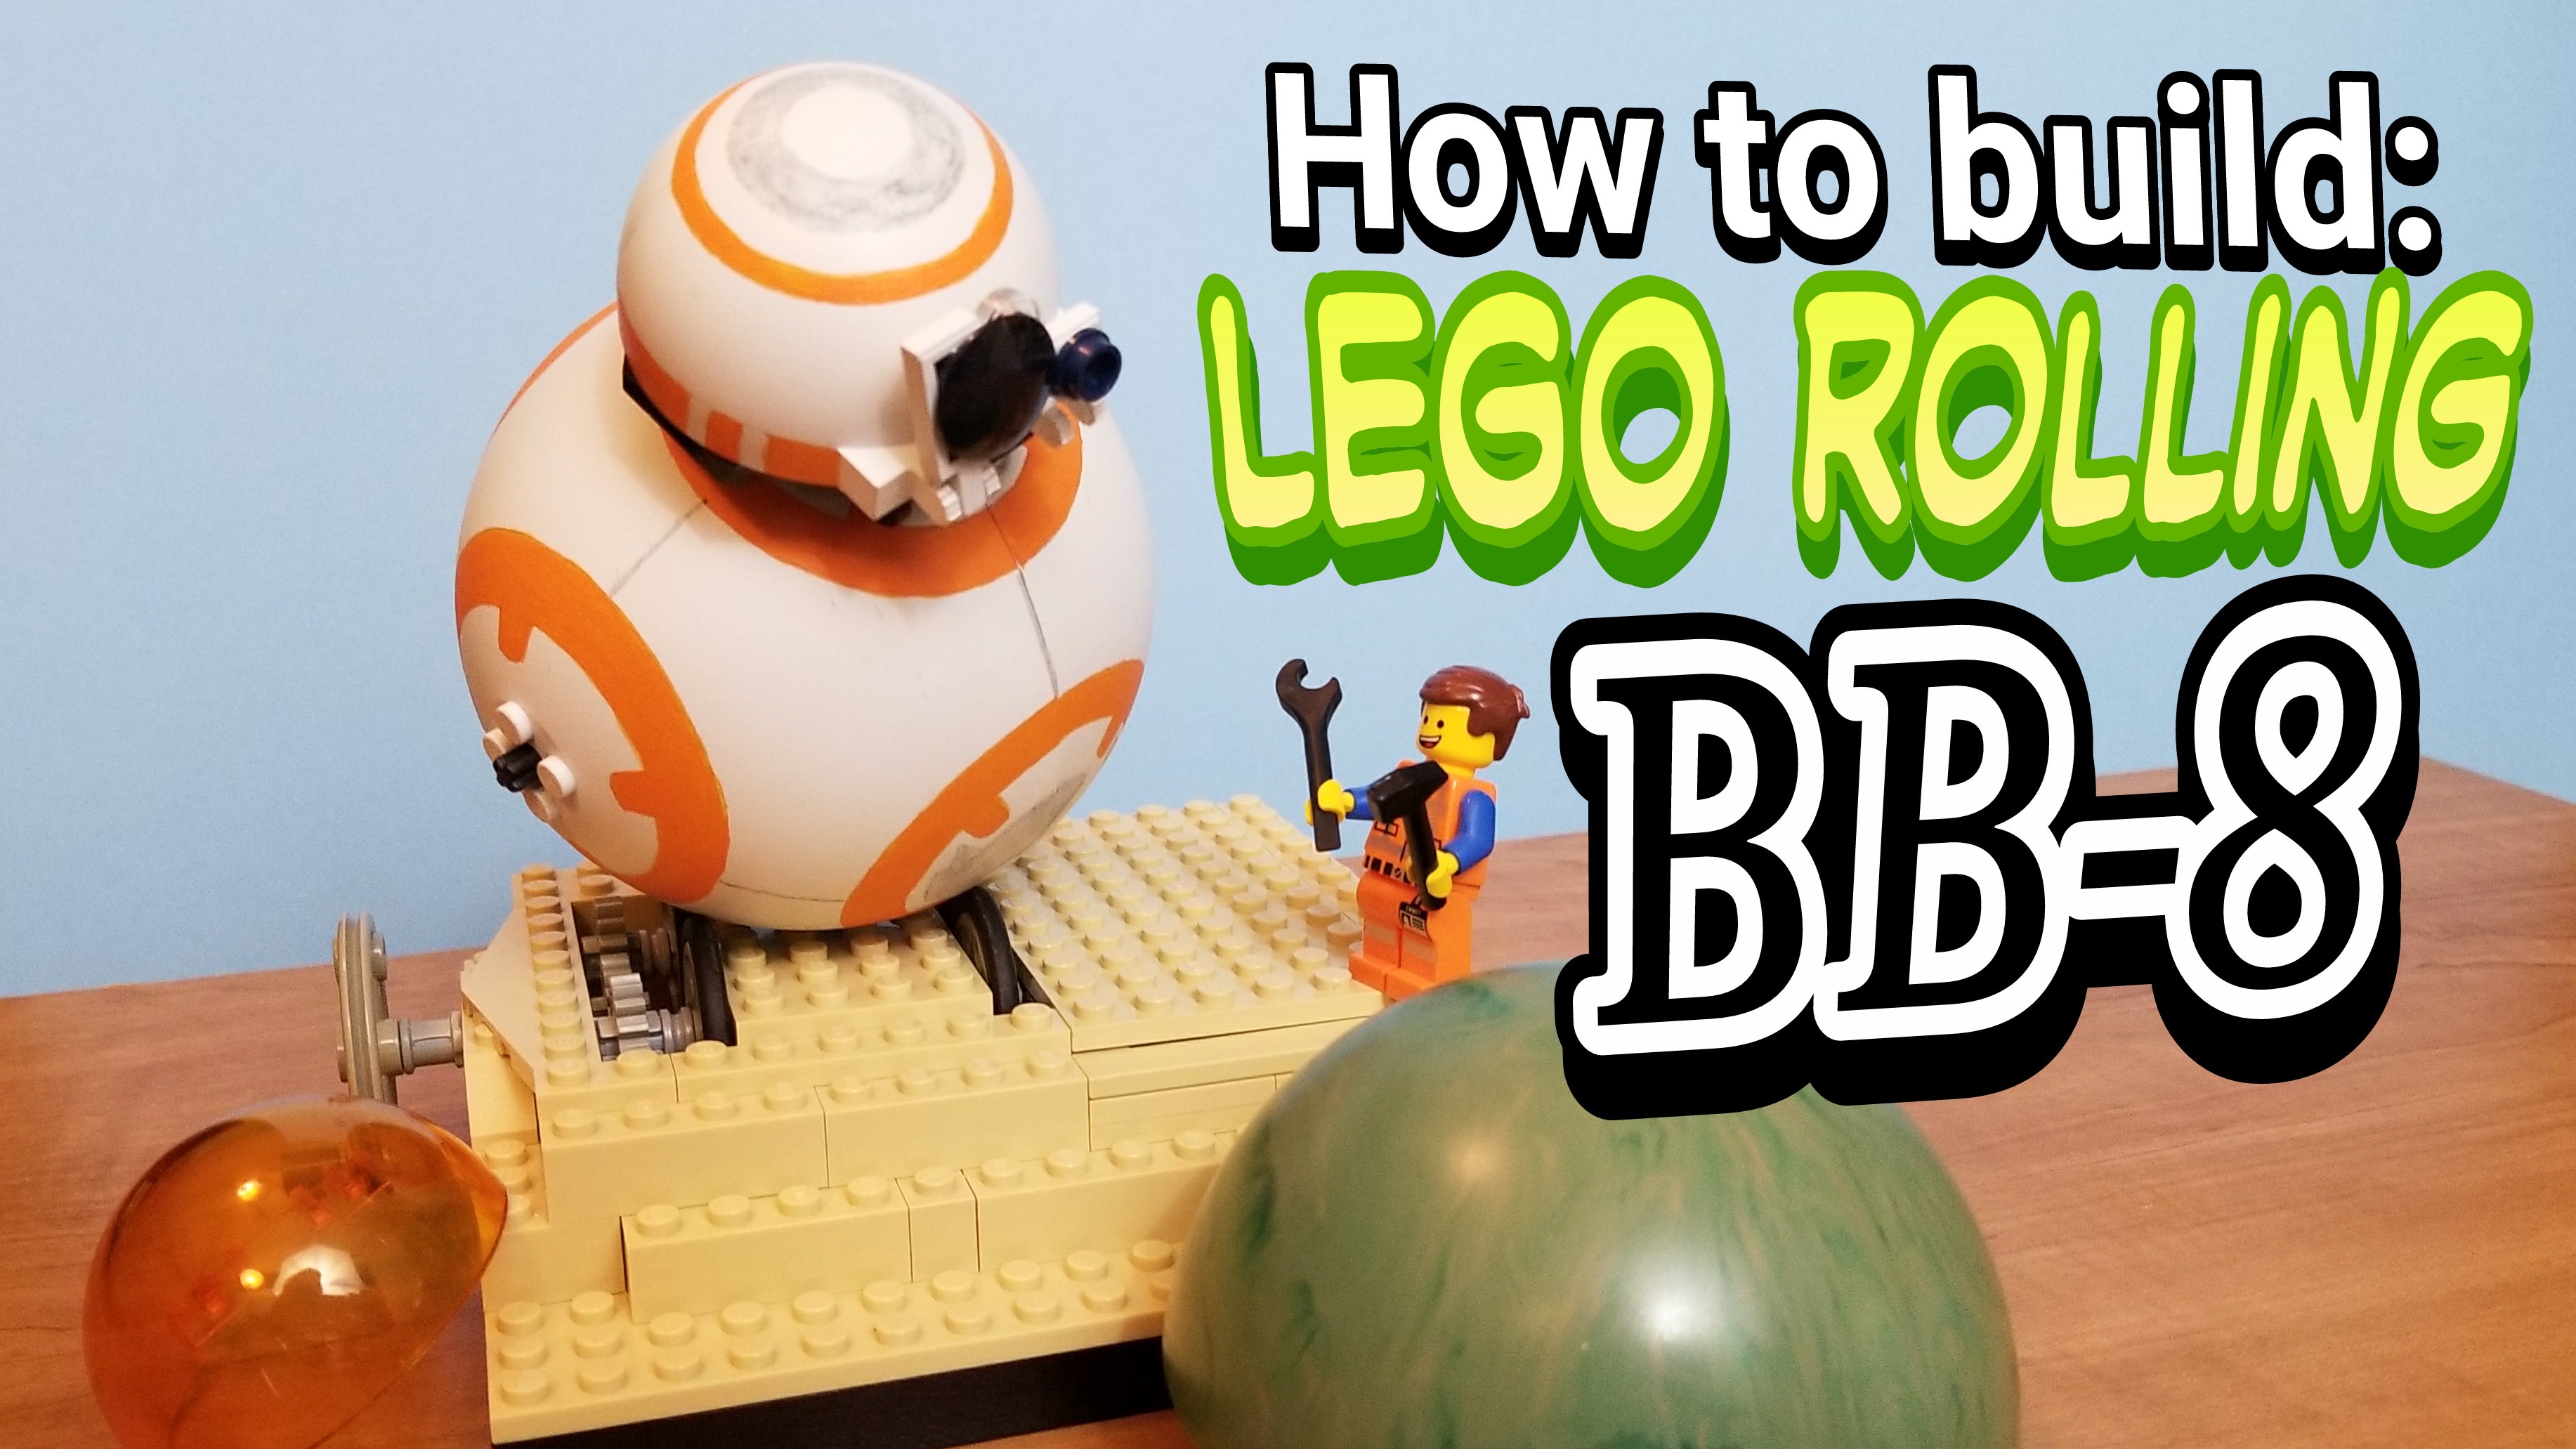 How to build a Lego Rolling BB-8